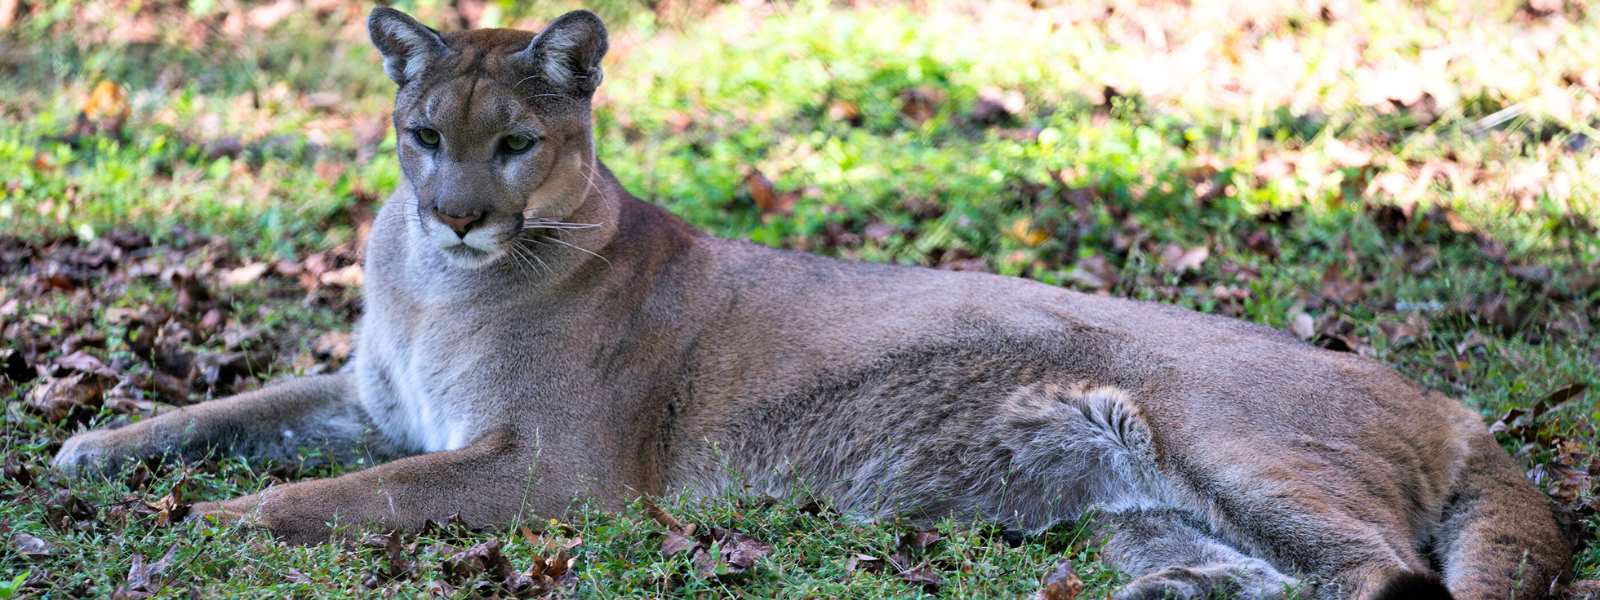 florida panther resting in a field